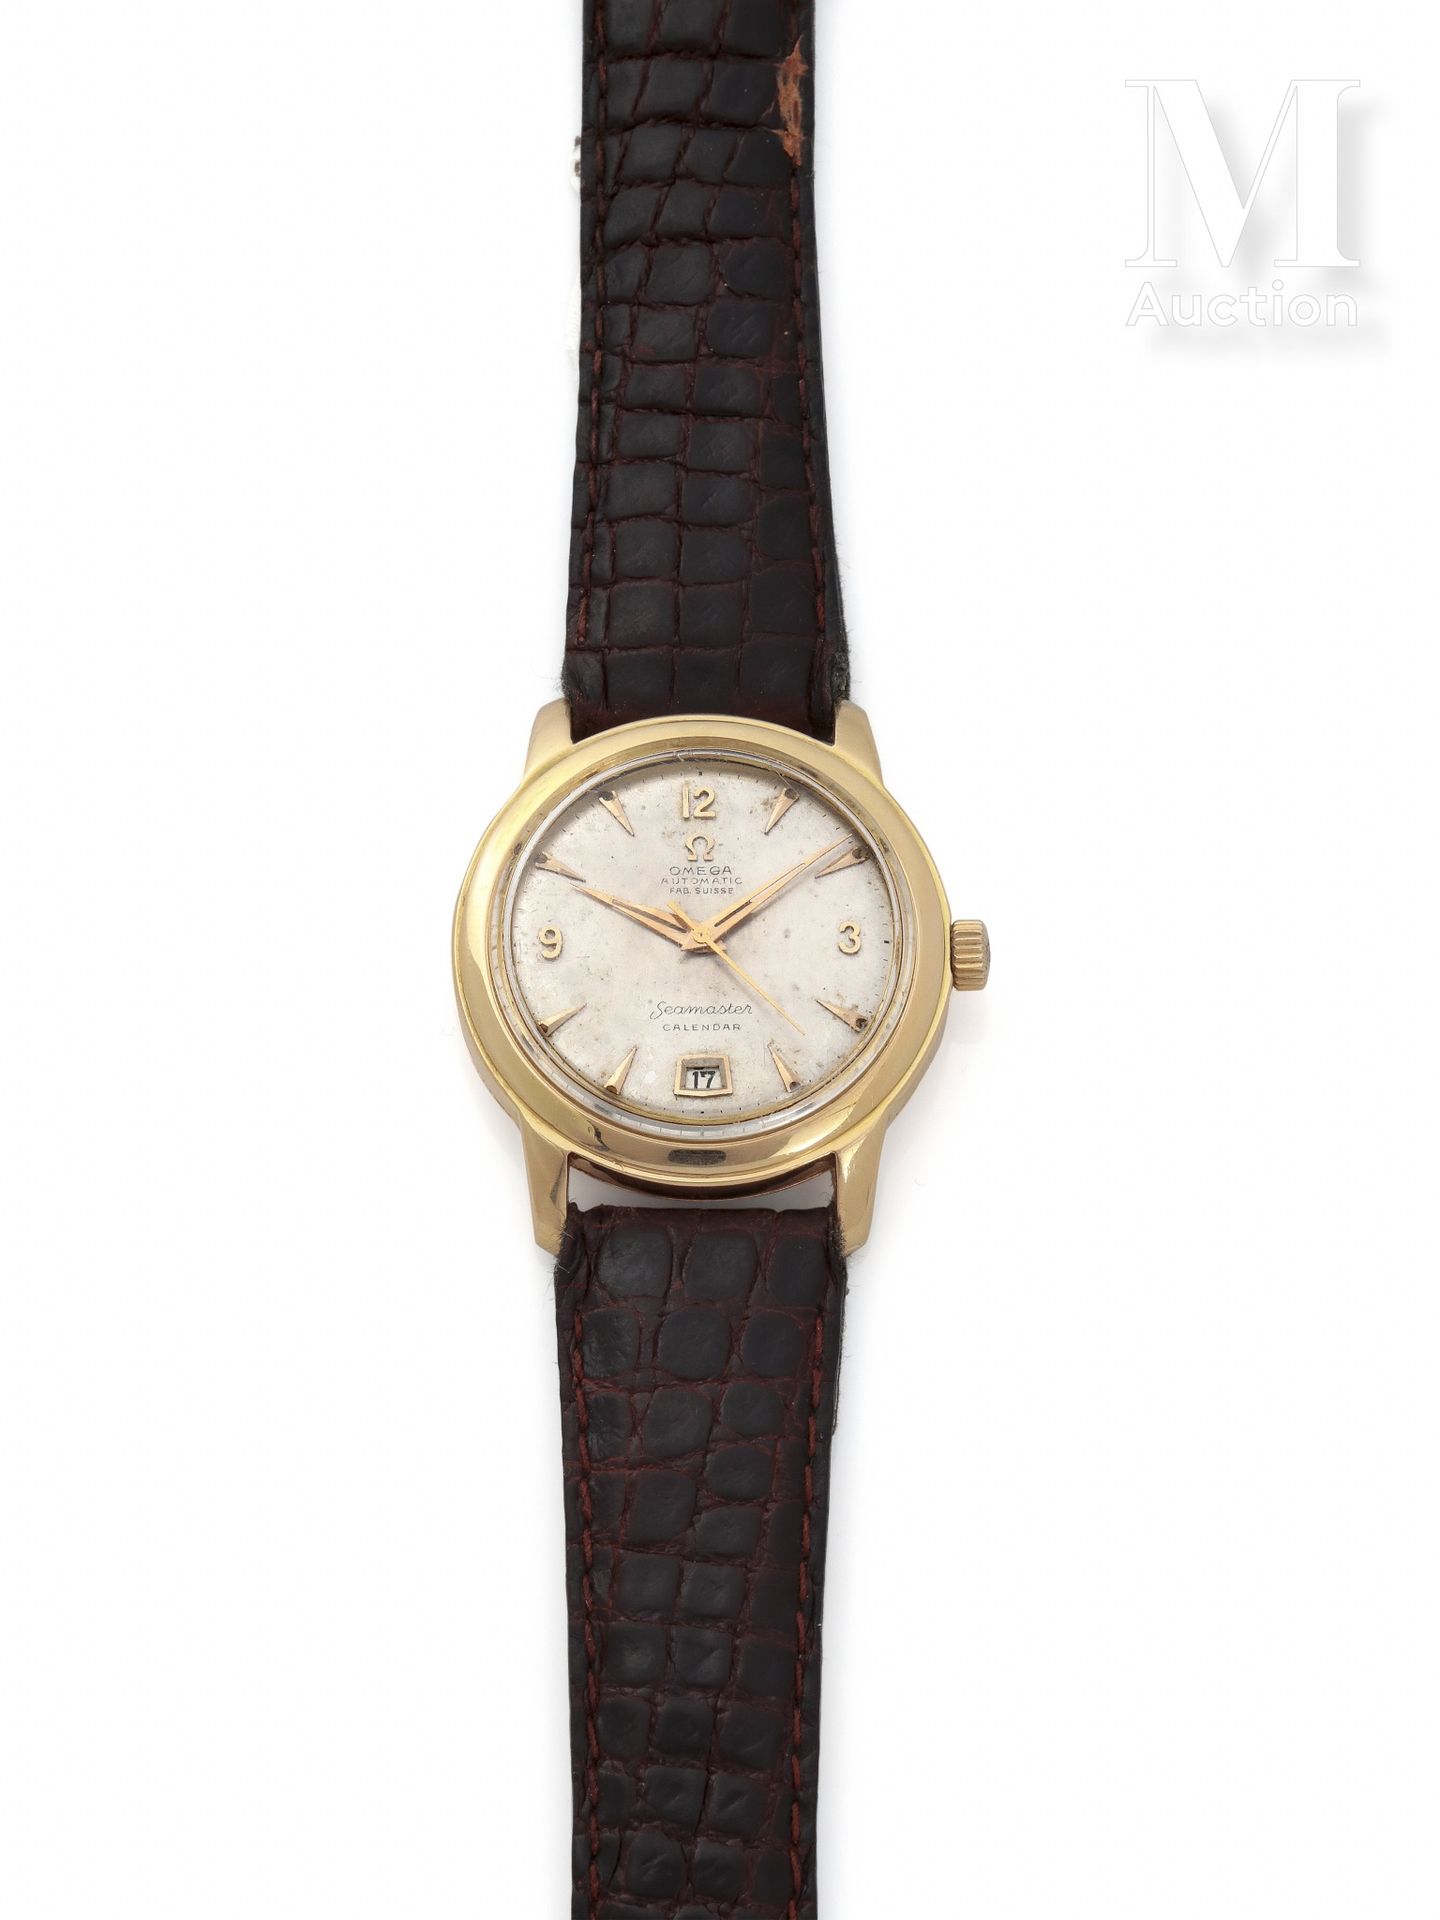 OMEGA "Seamaster Calendar

Circa 1950

Men's watch

Silver dial with index and A&hellip;